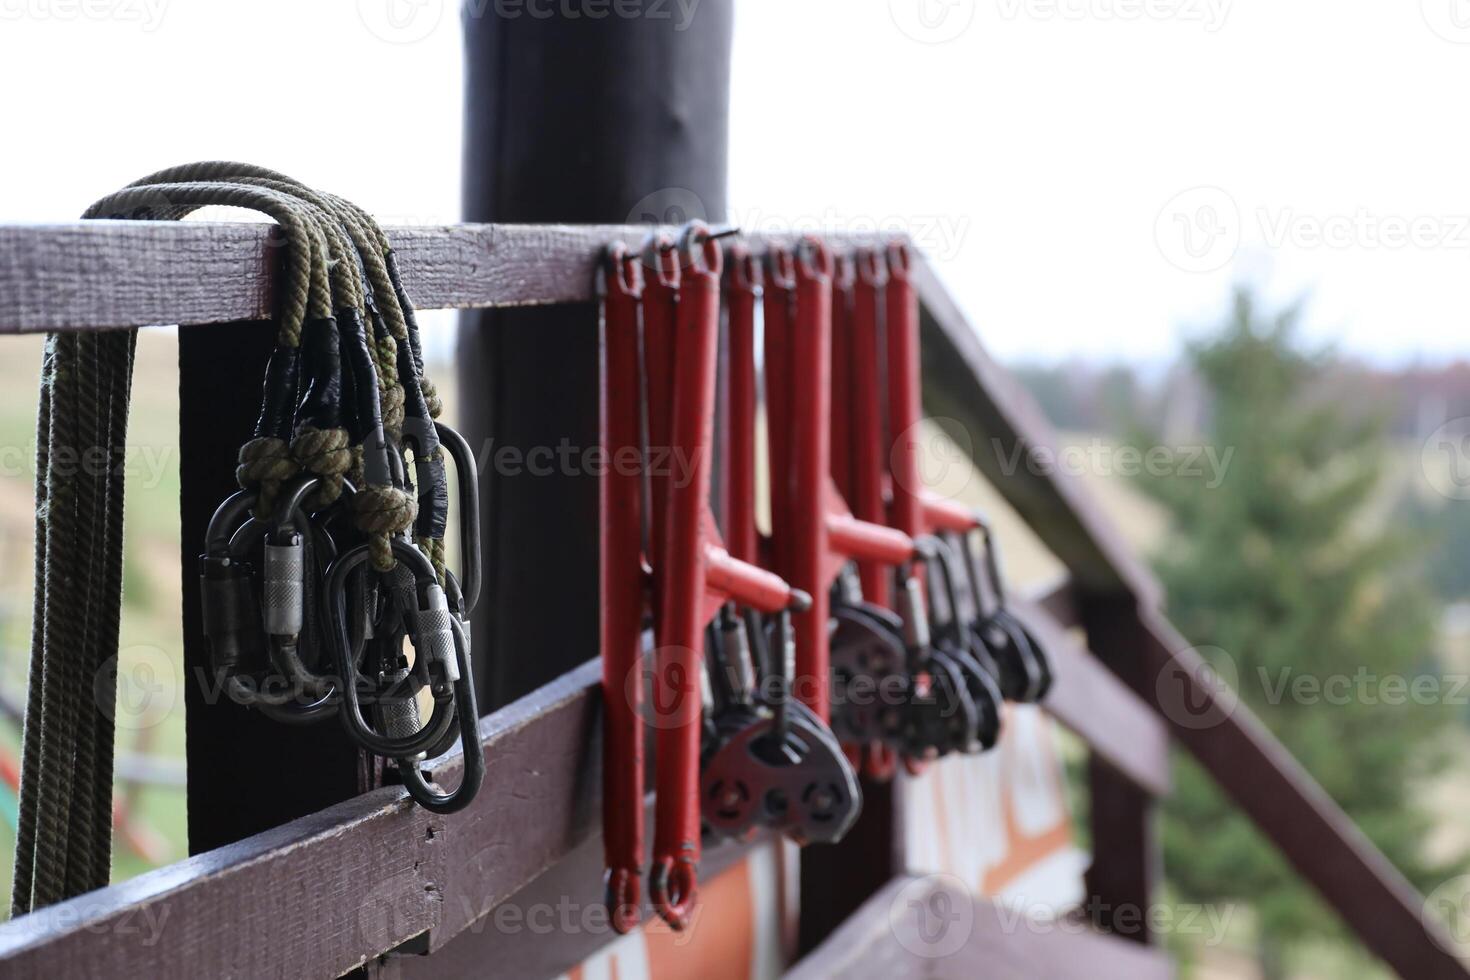 large metal locking carabiners with rope, climbing gear hanging on the store room. Height safety harness and arborist equipment photo